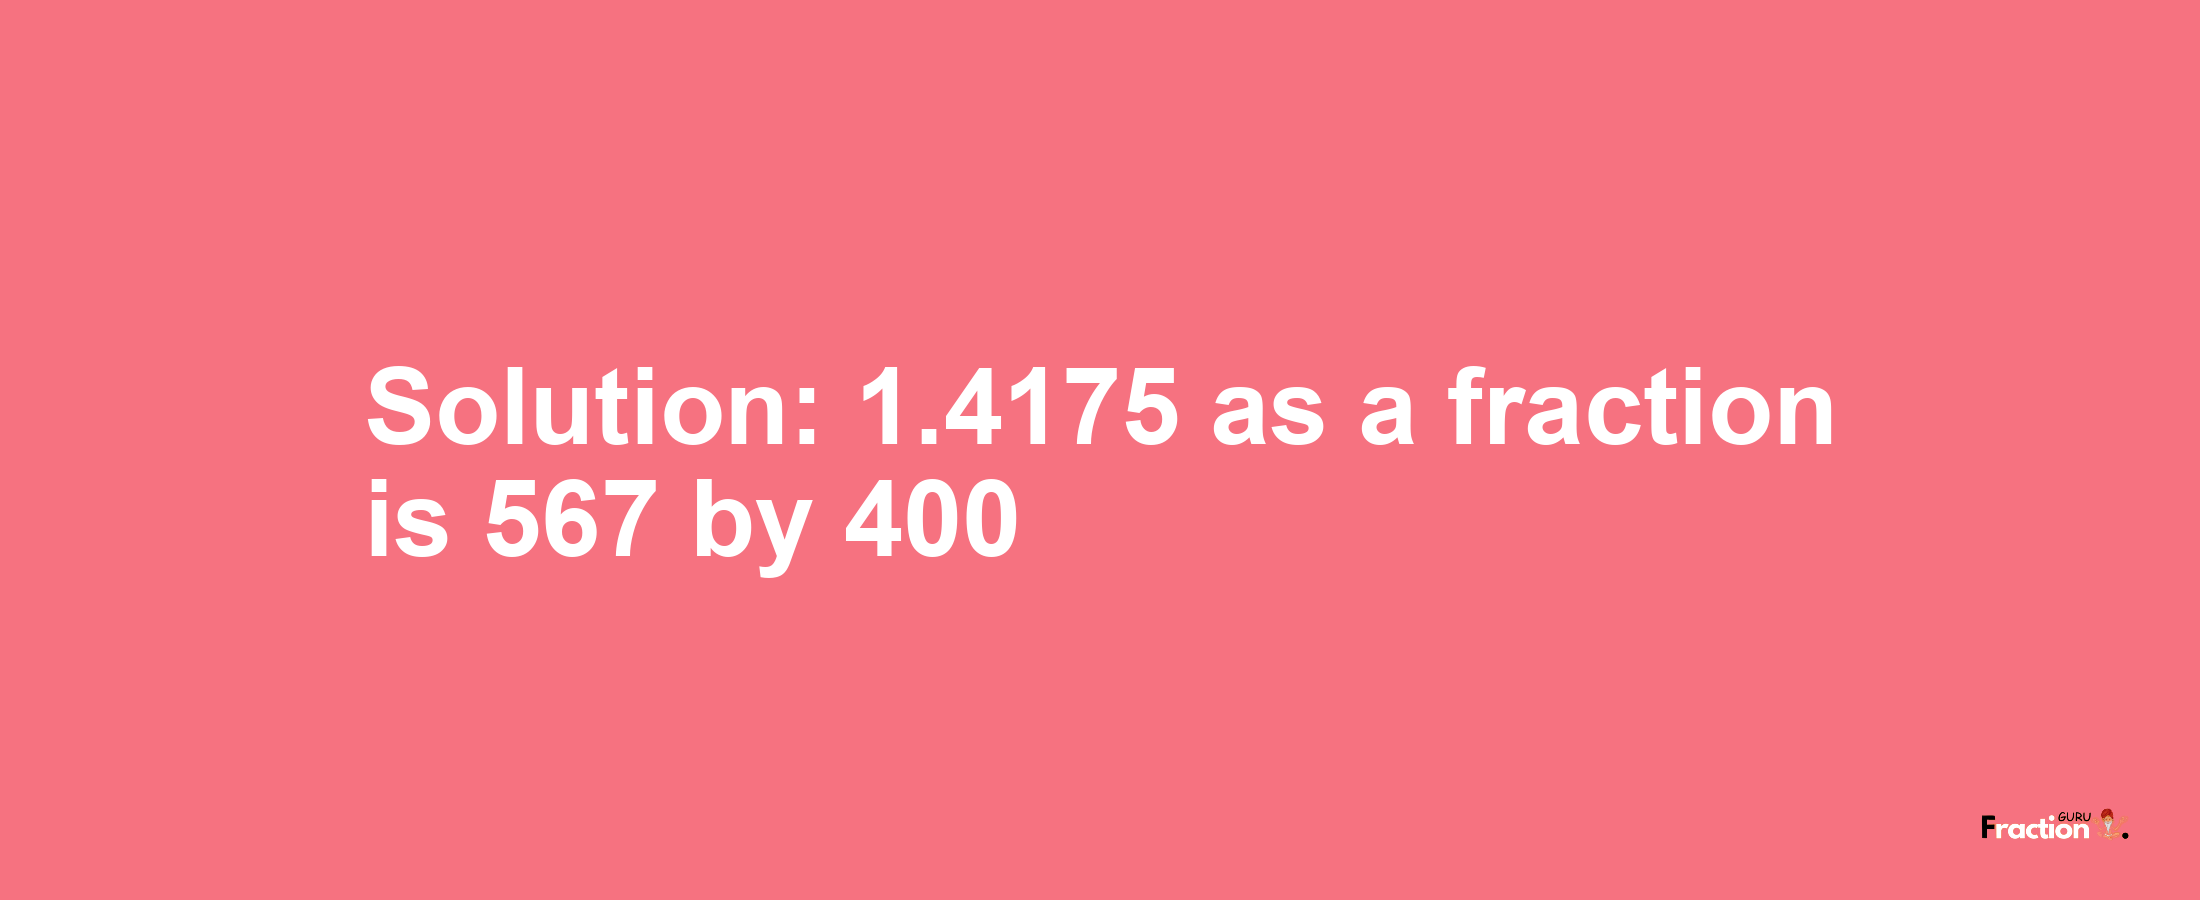 Solution:1.4175 as a fraction is 567/400